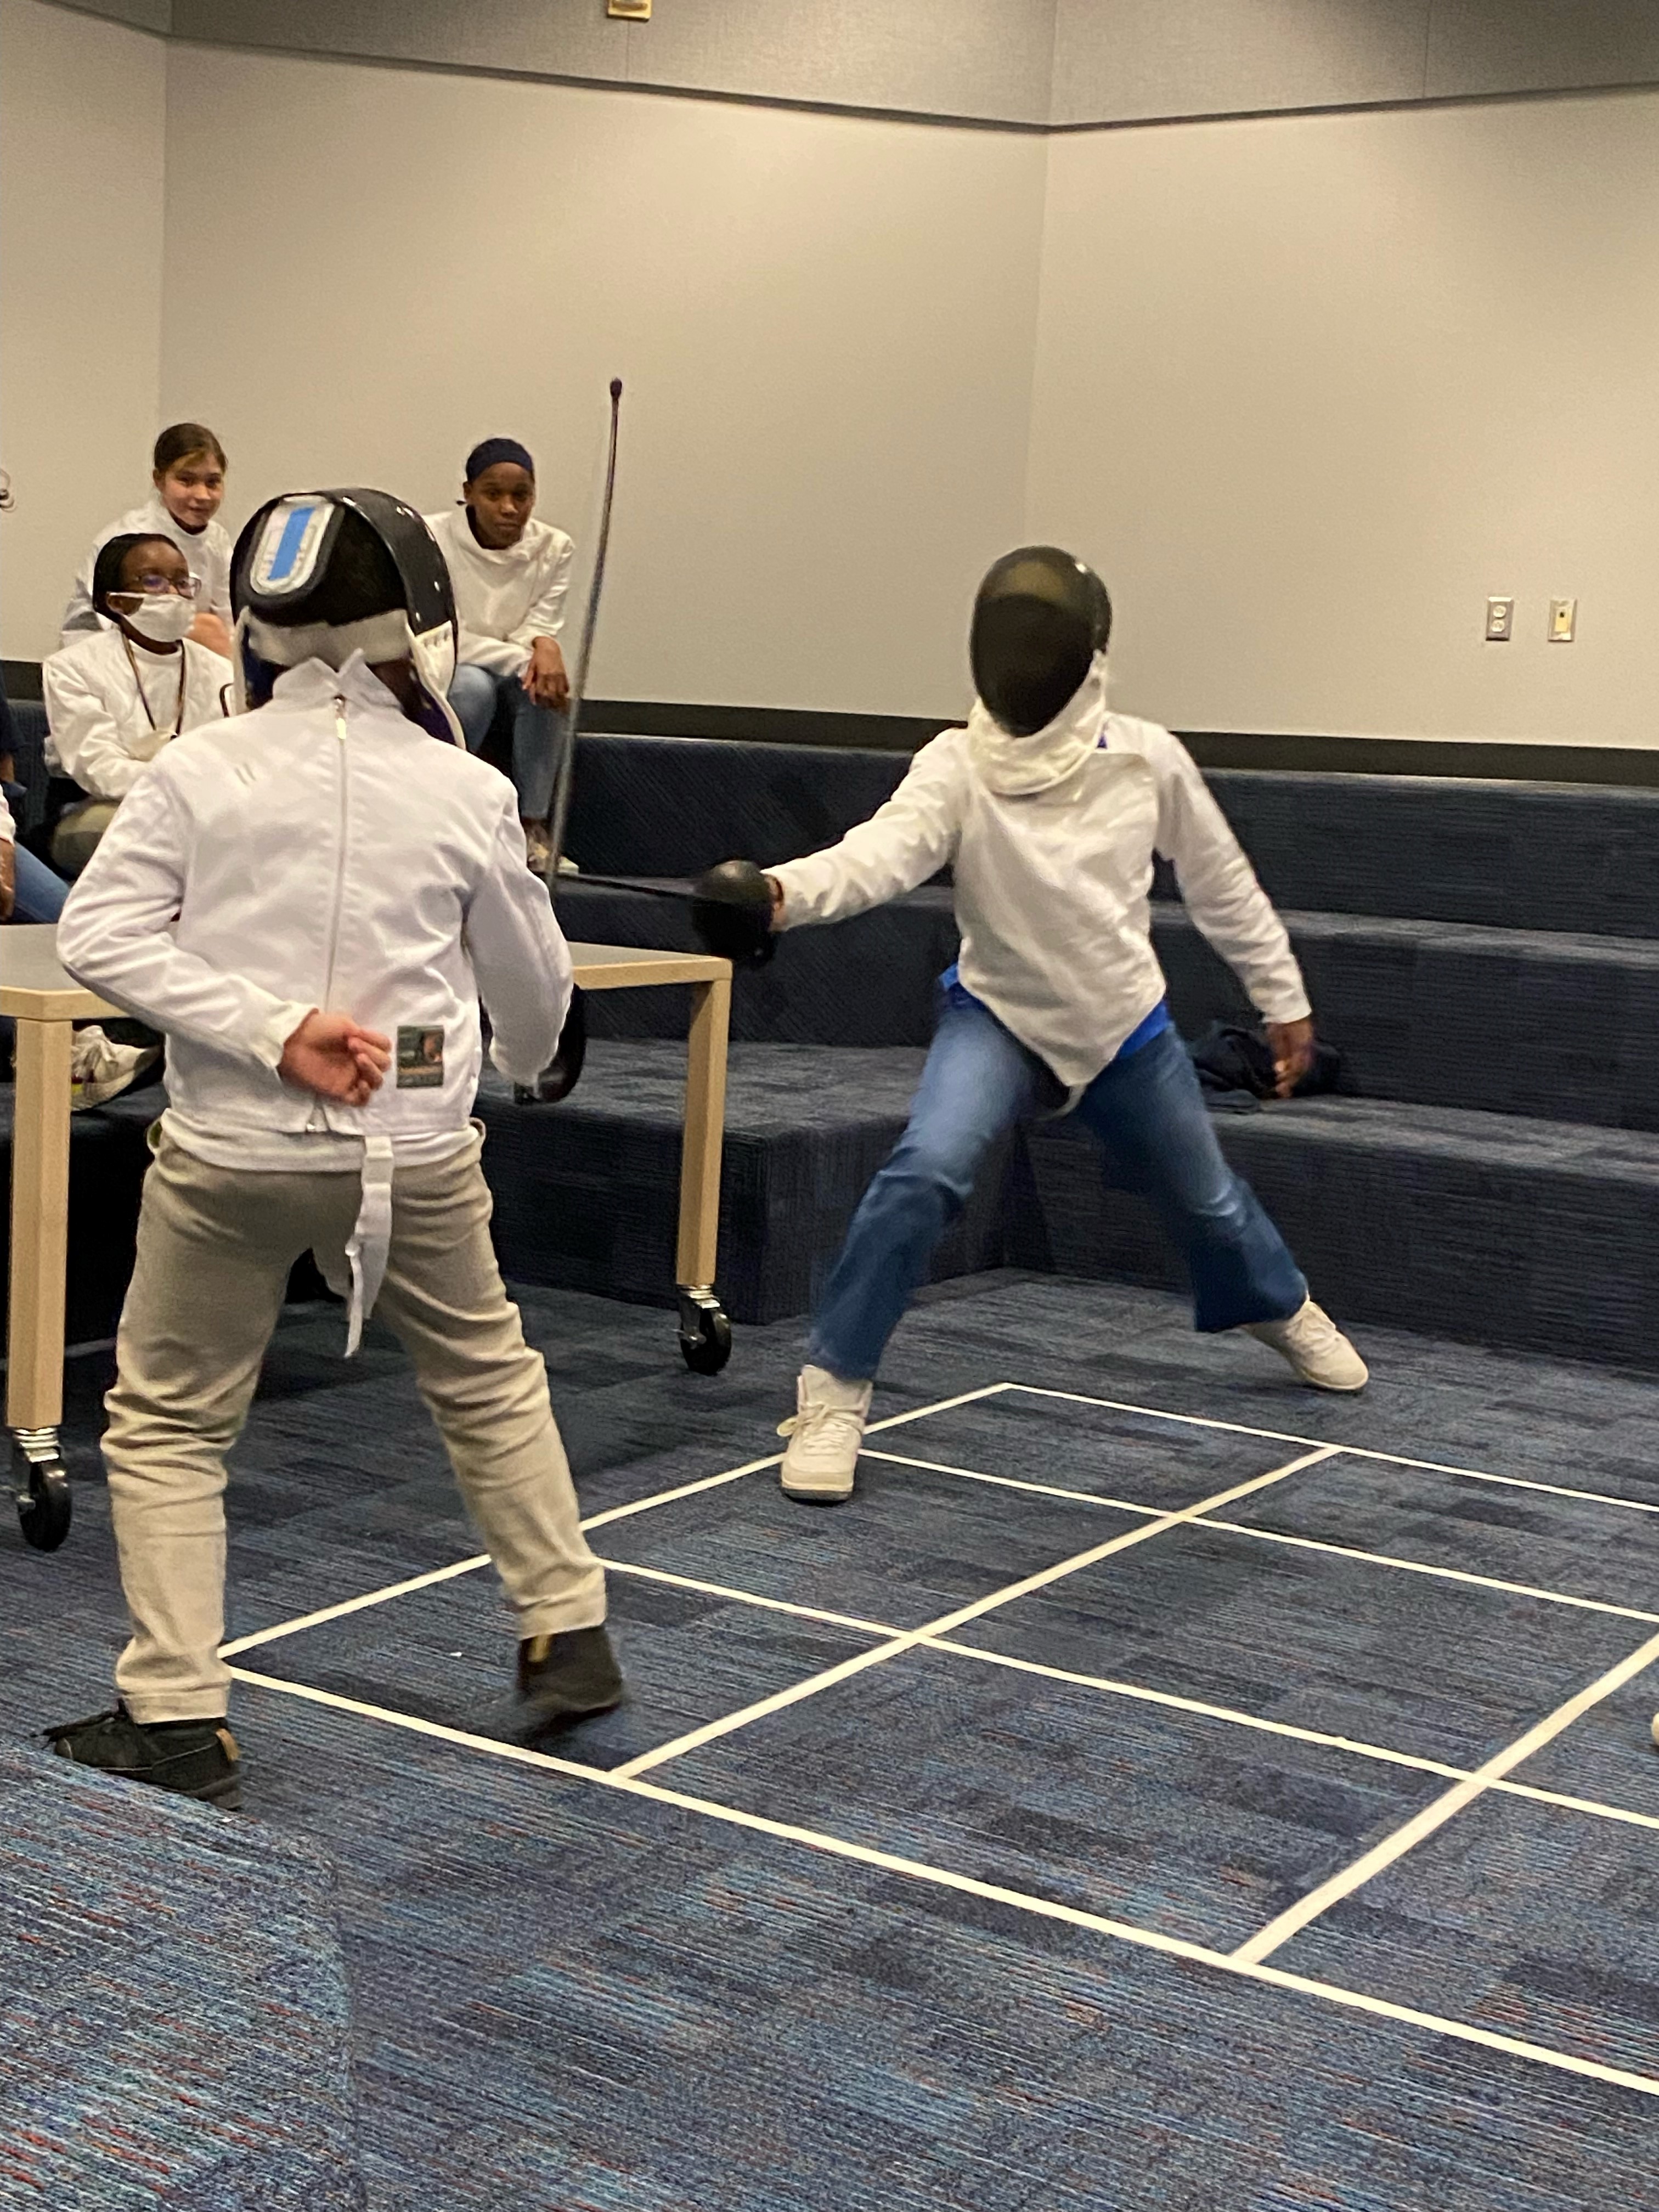 Miller is Fencing in CIA